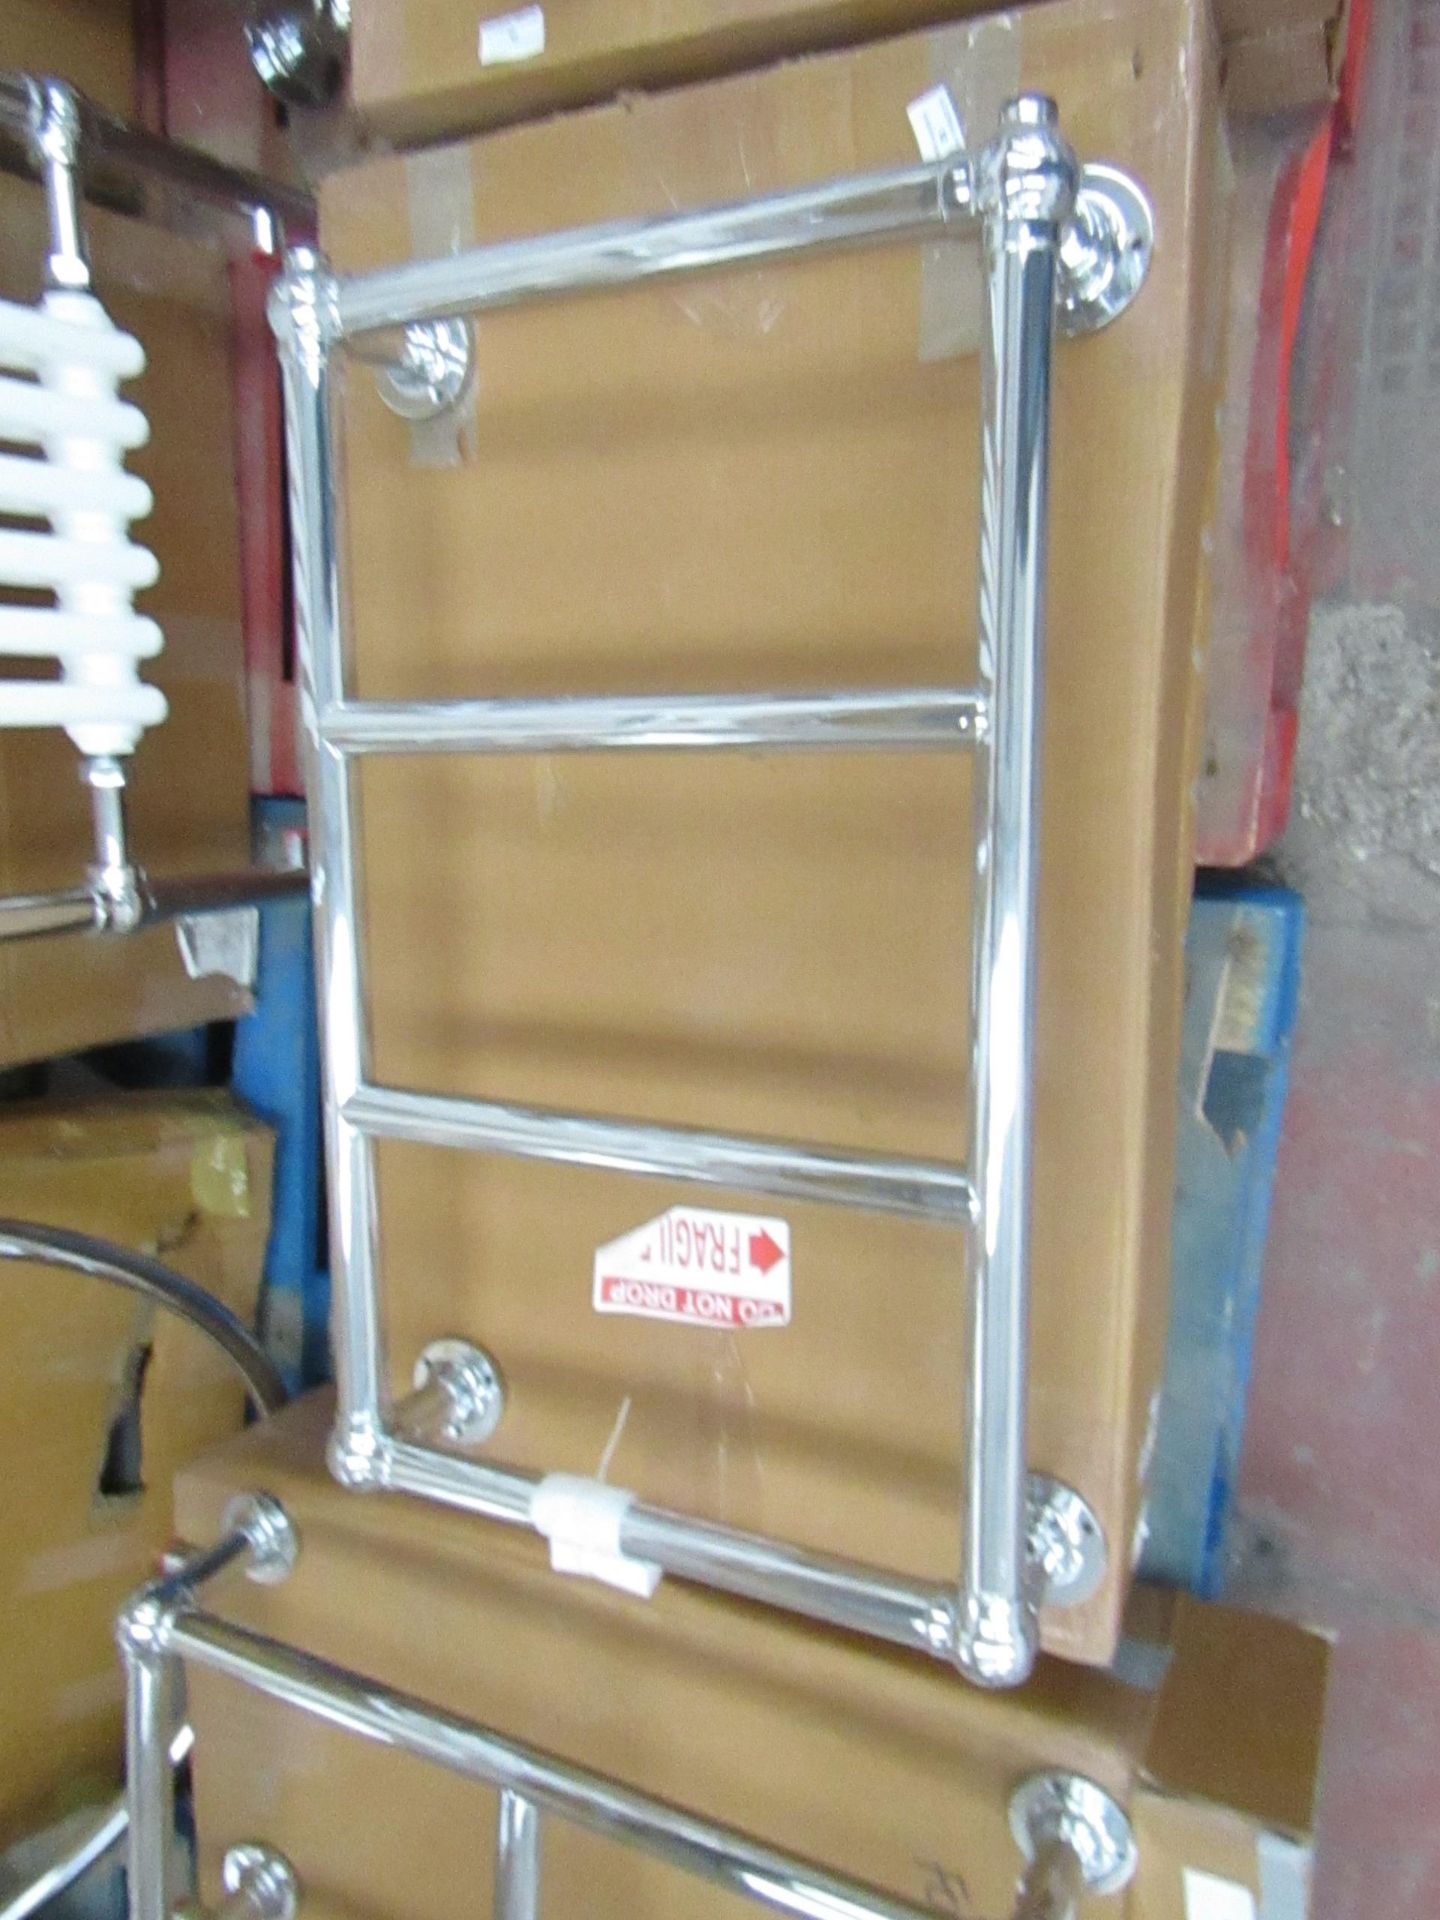 Chrome Astor wall mounter radiator, unchecked and boxed 72 x 44 x 14cm